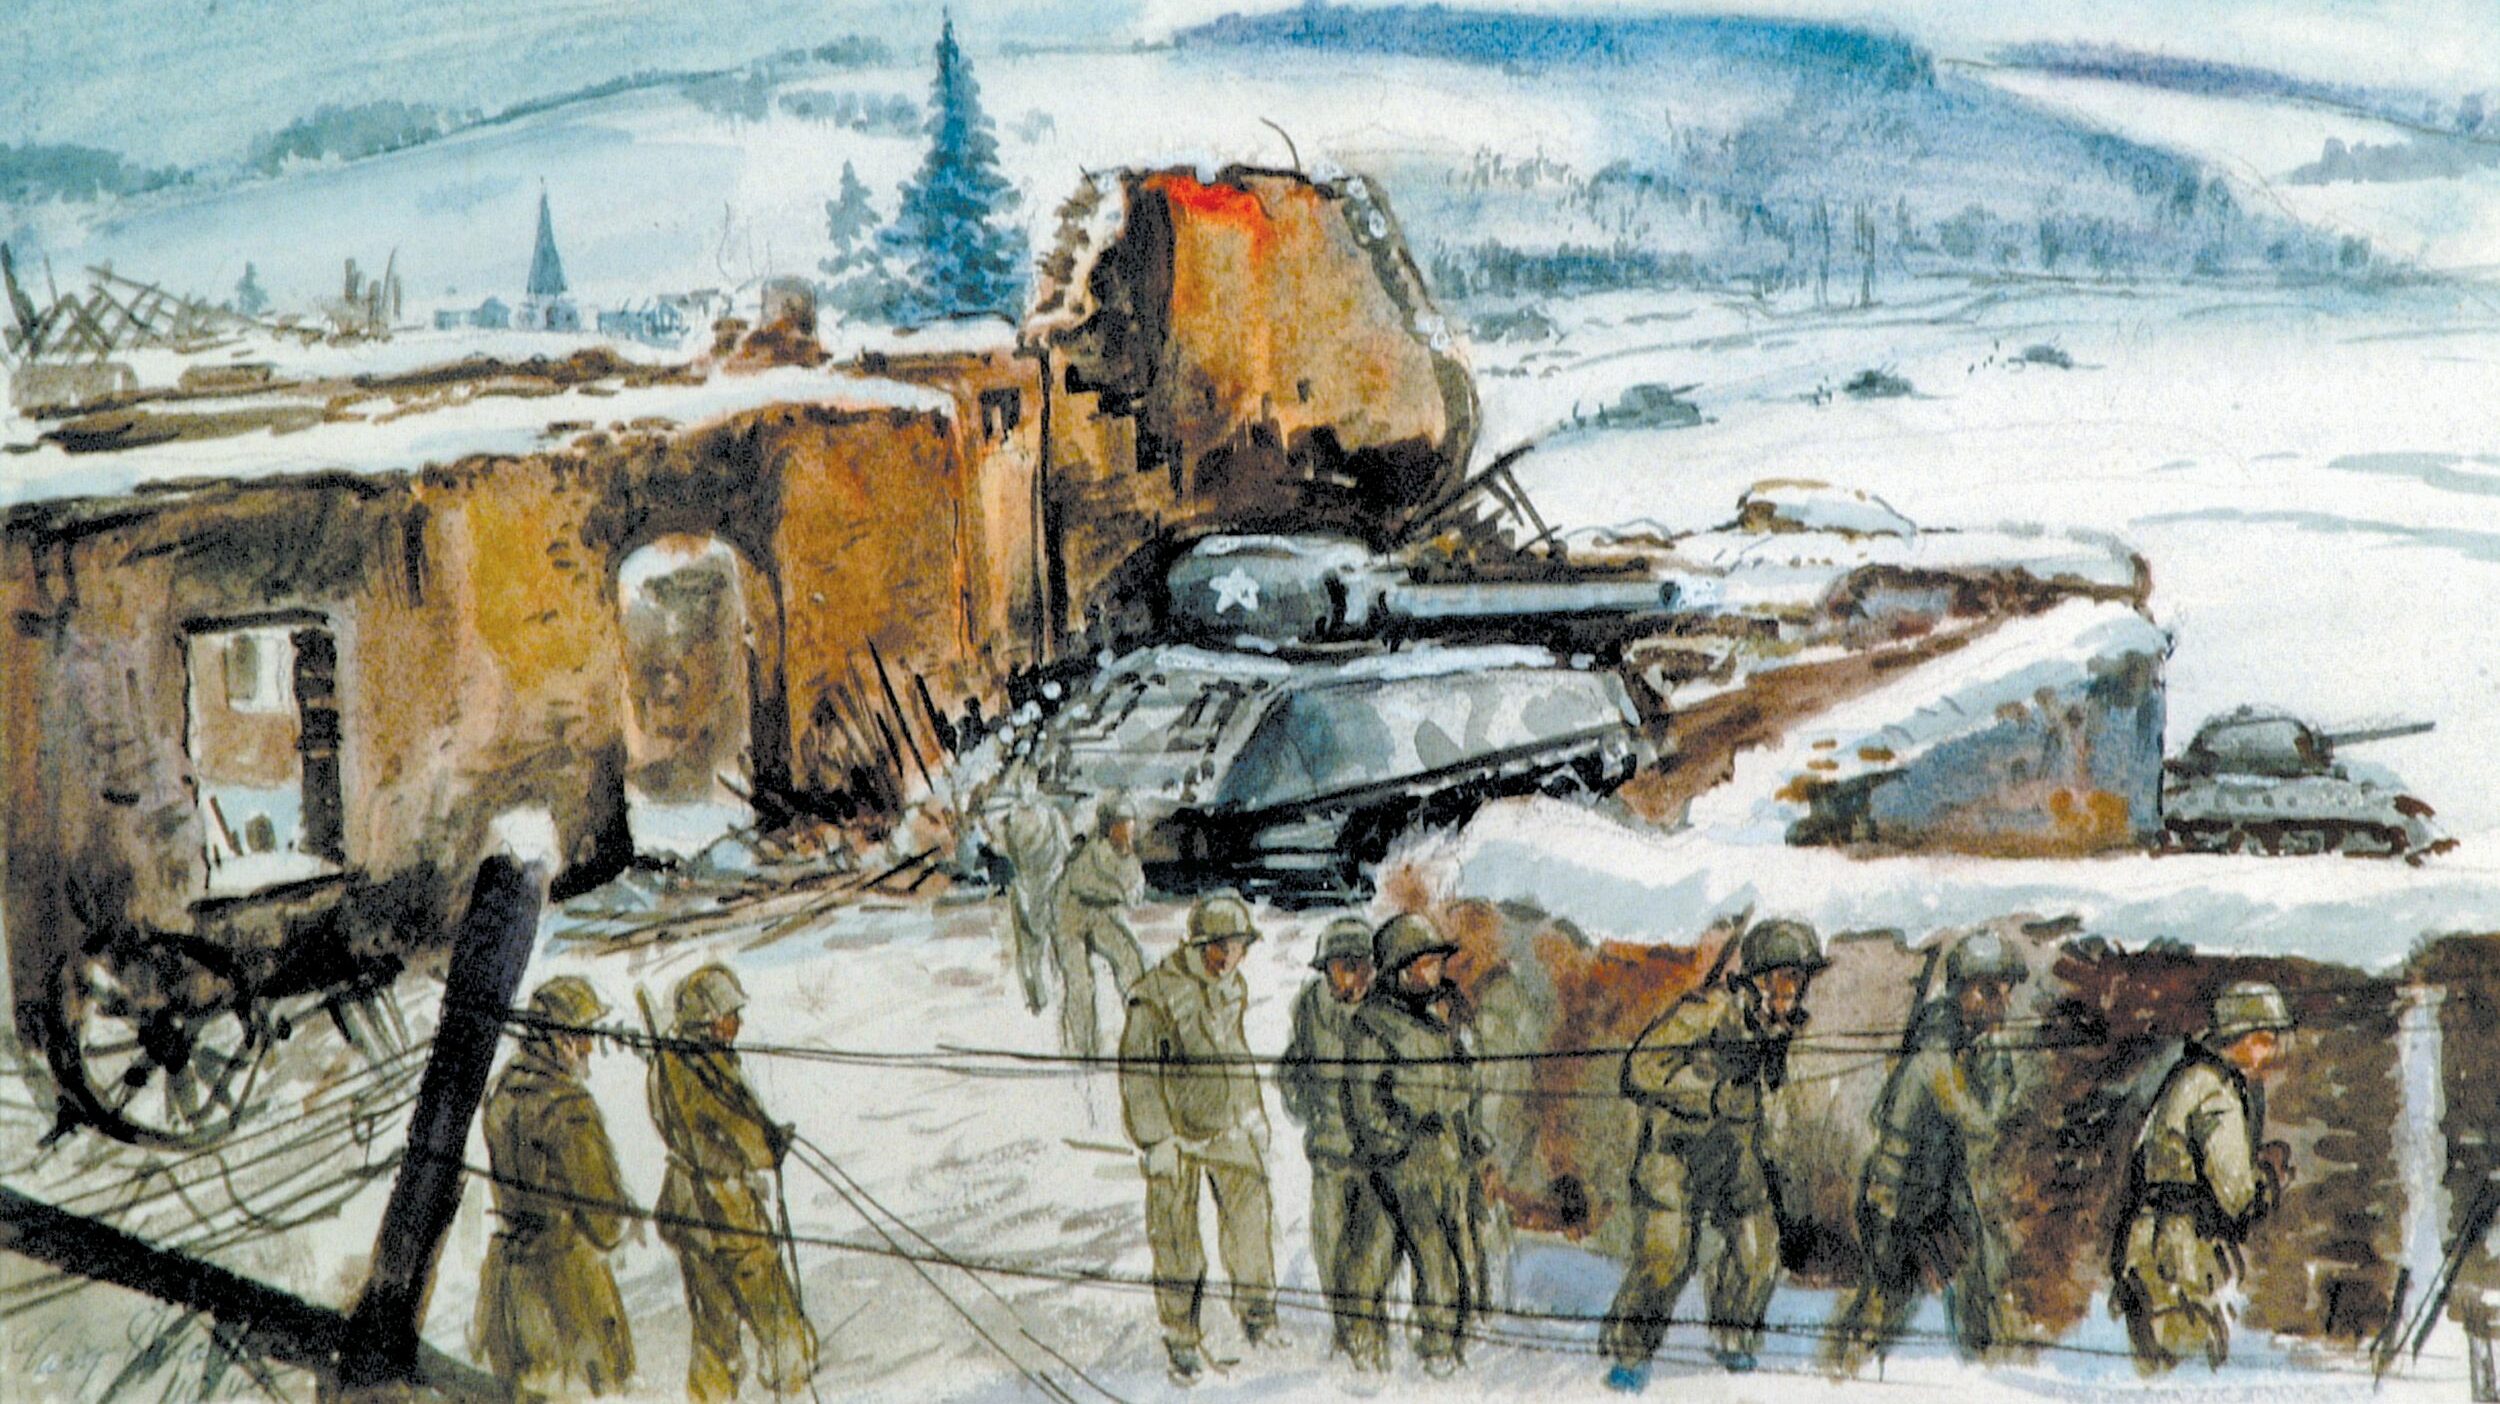 This haunting image of a snow-covered Bastogne was painted by a U.S. Army artist about the time of the siege in December 1944. U.S. forces refused to evacuate the Belgian crossroads town and stood against repeated German attacks.